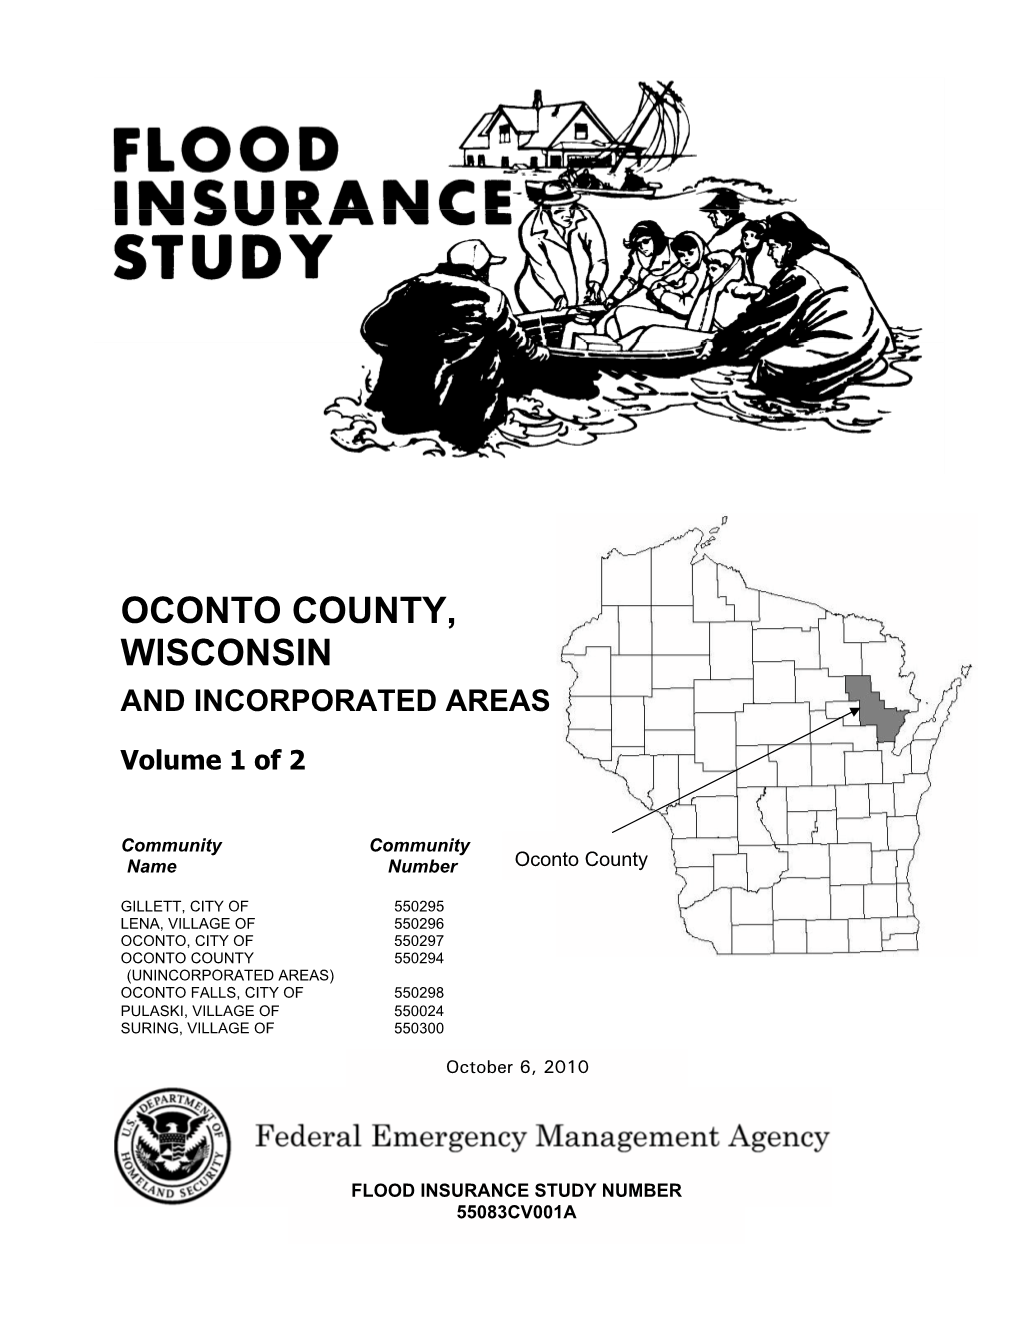 Oconto County, Wisconsin and Incorporated Areas